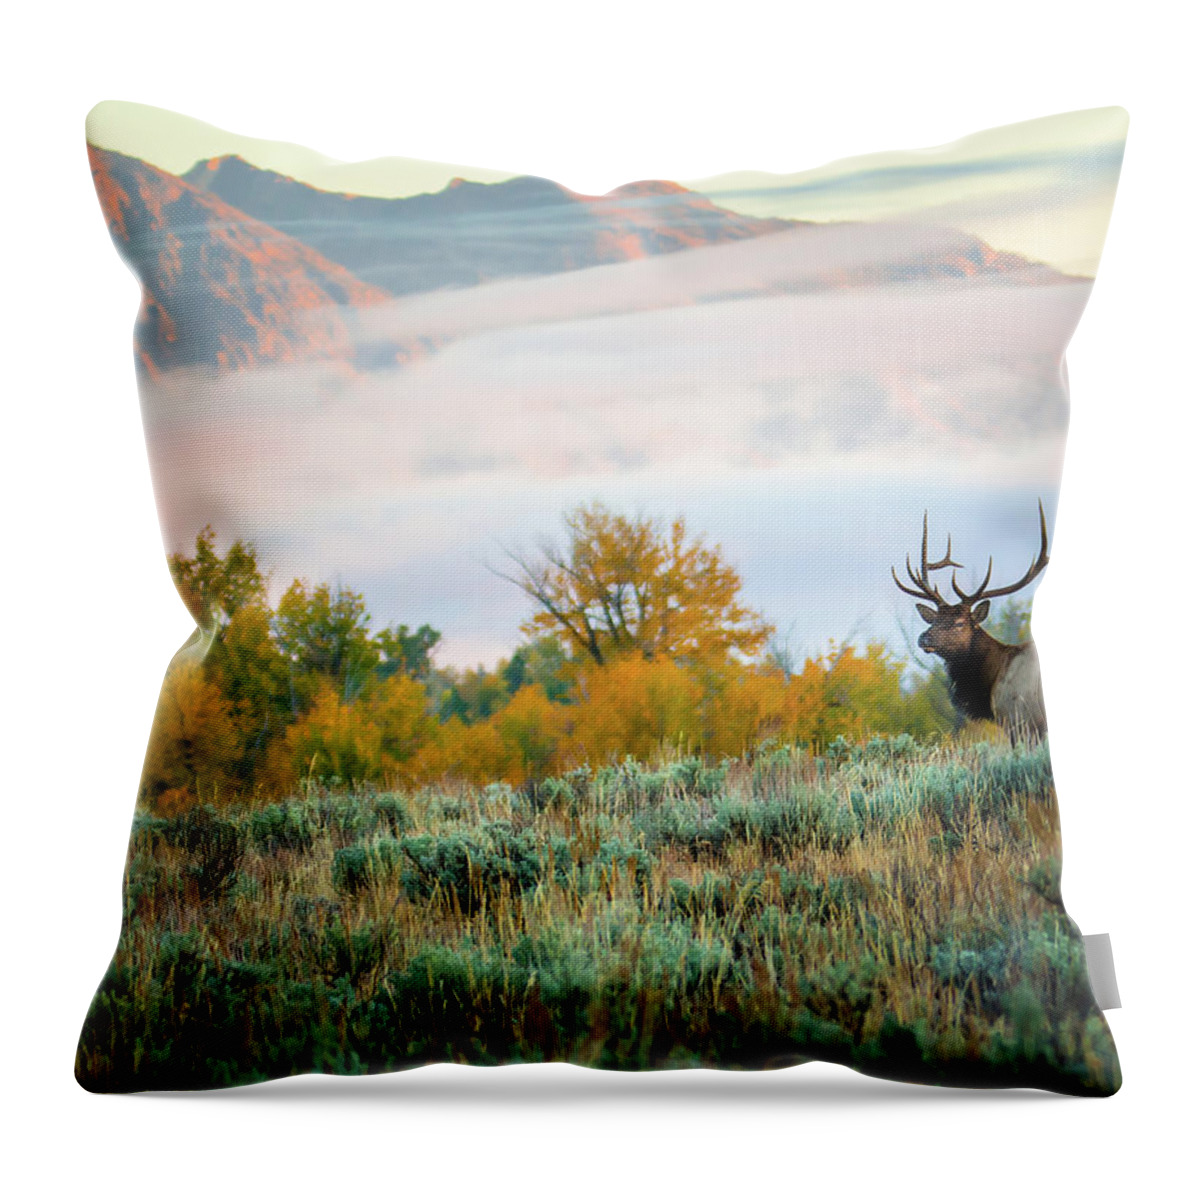 Nature Throw Pillow featuring the photograph Morning Fog by Steve Marler